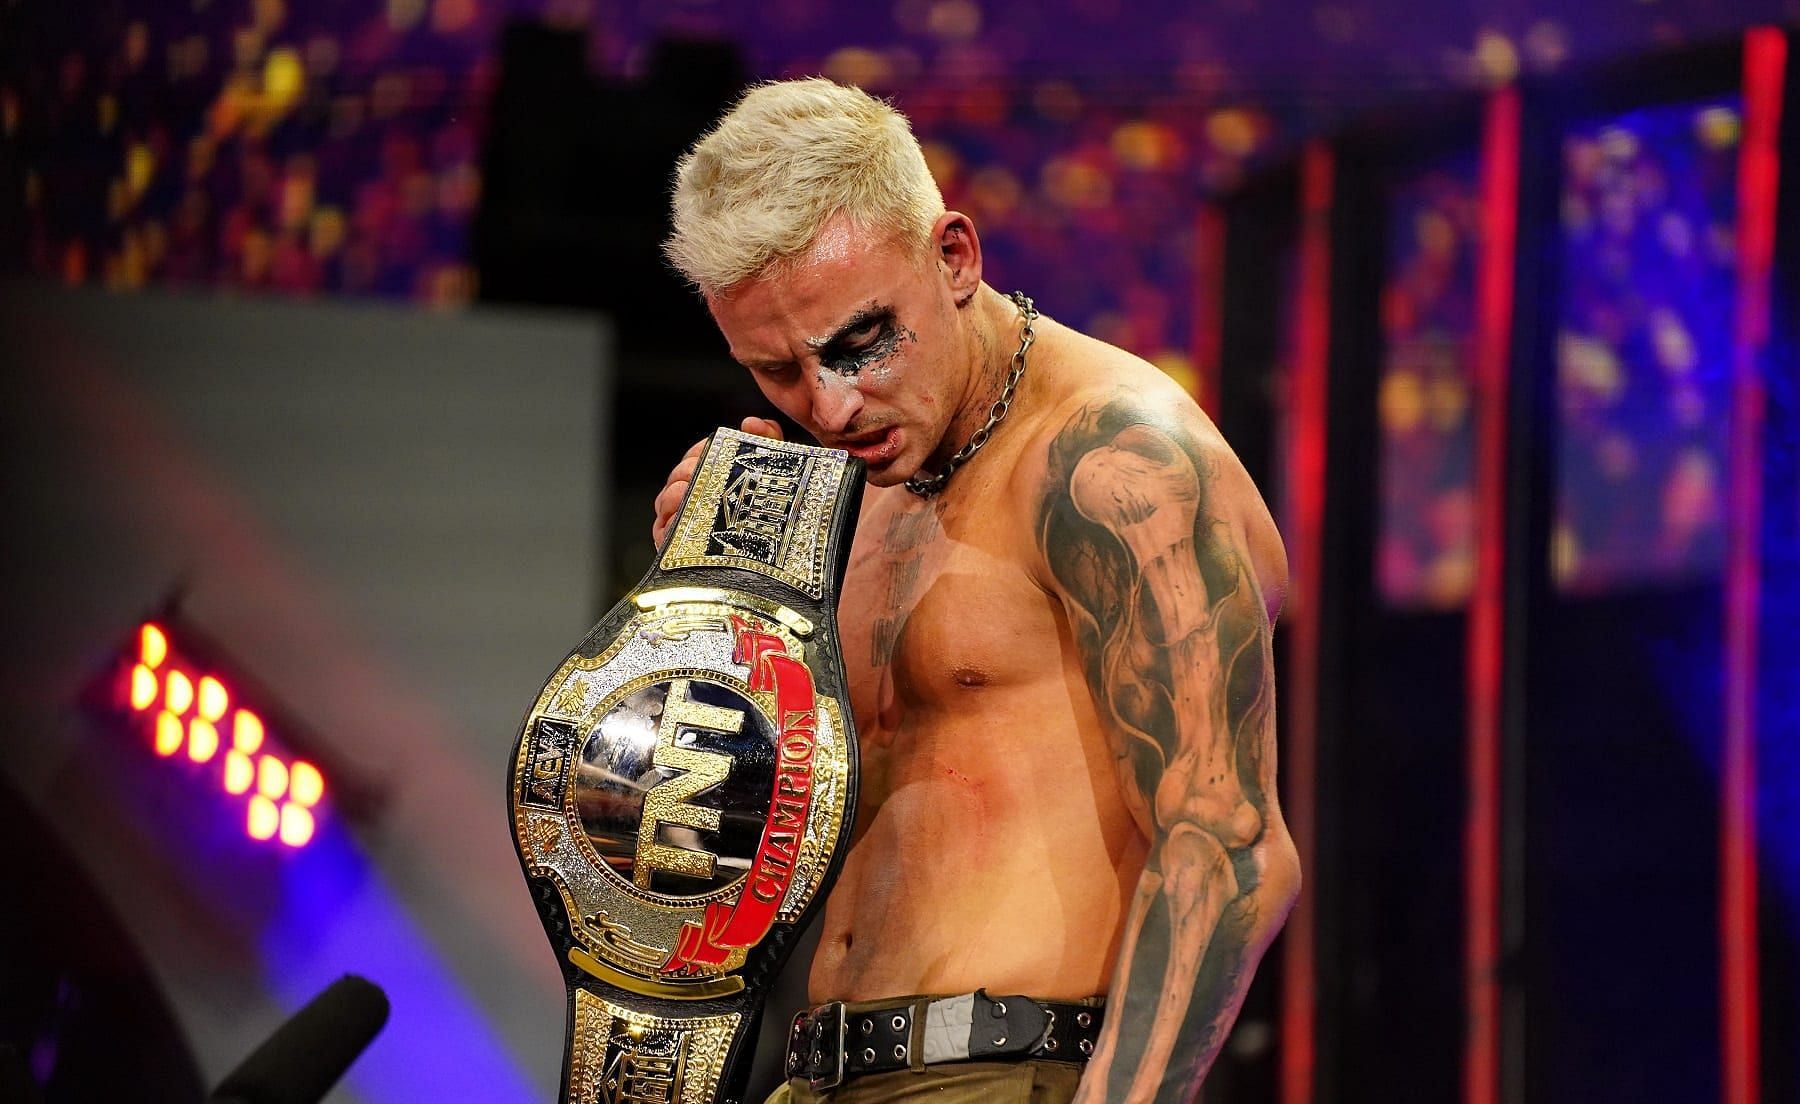 Darby Allin is one of the most popular stars in AEW today